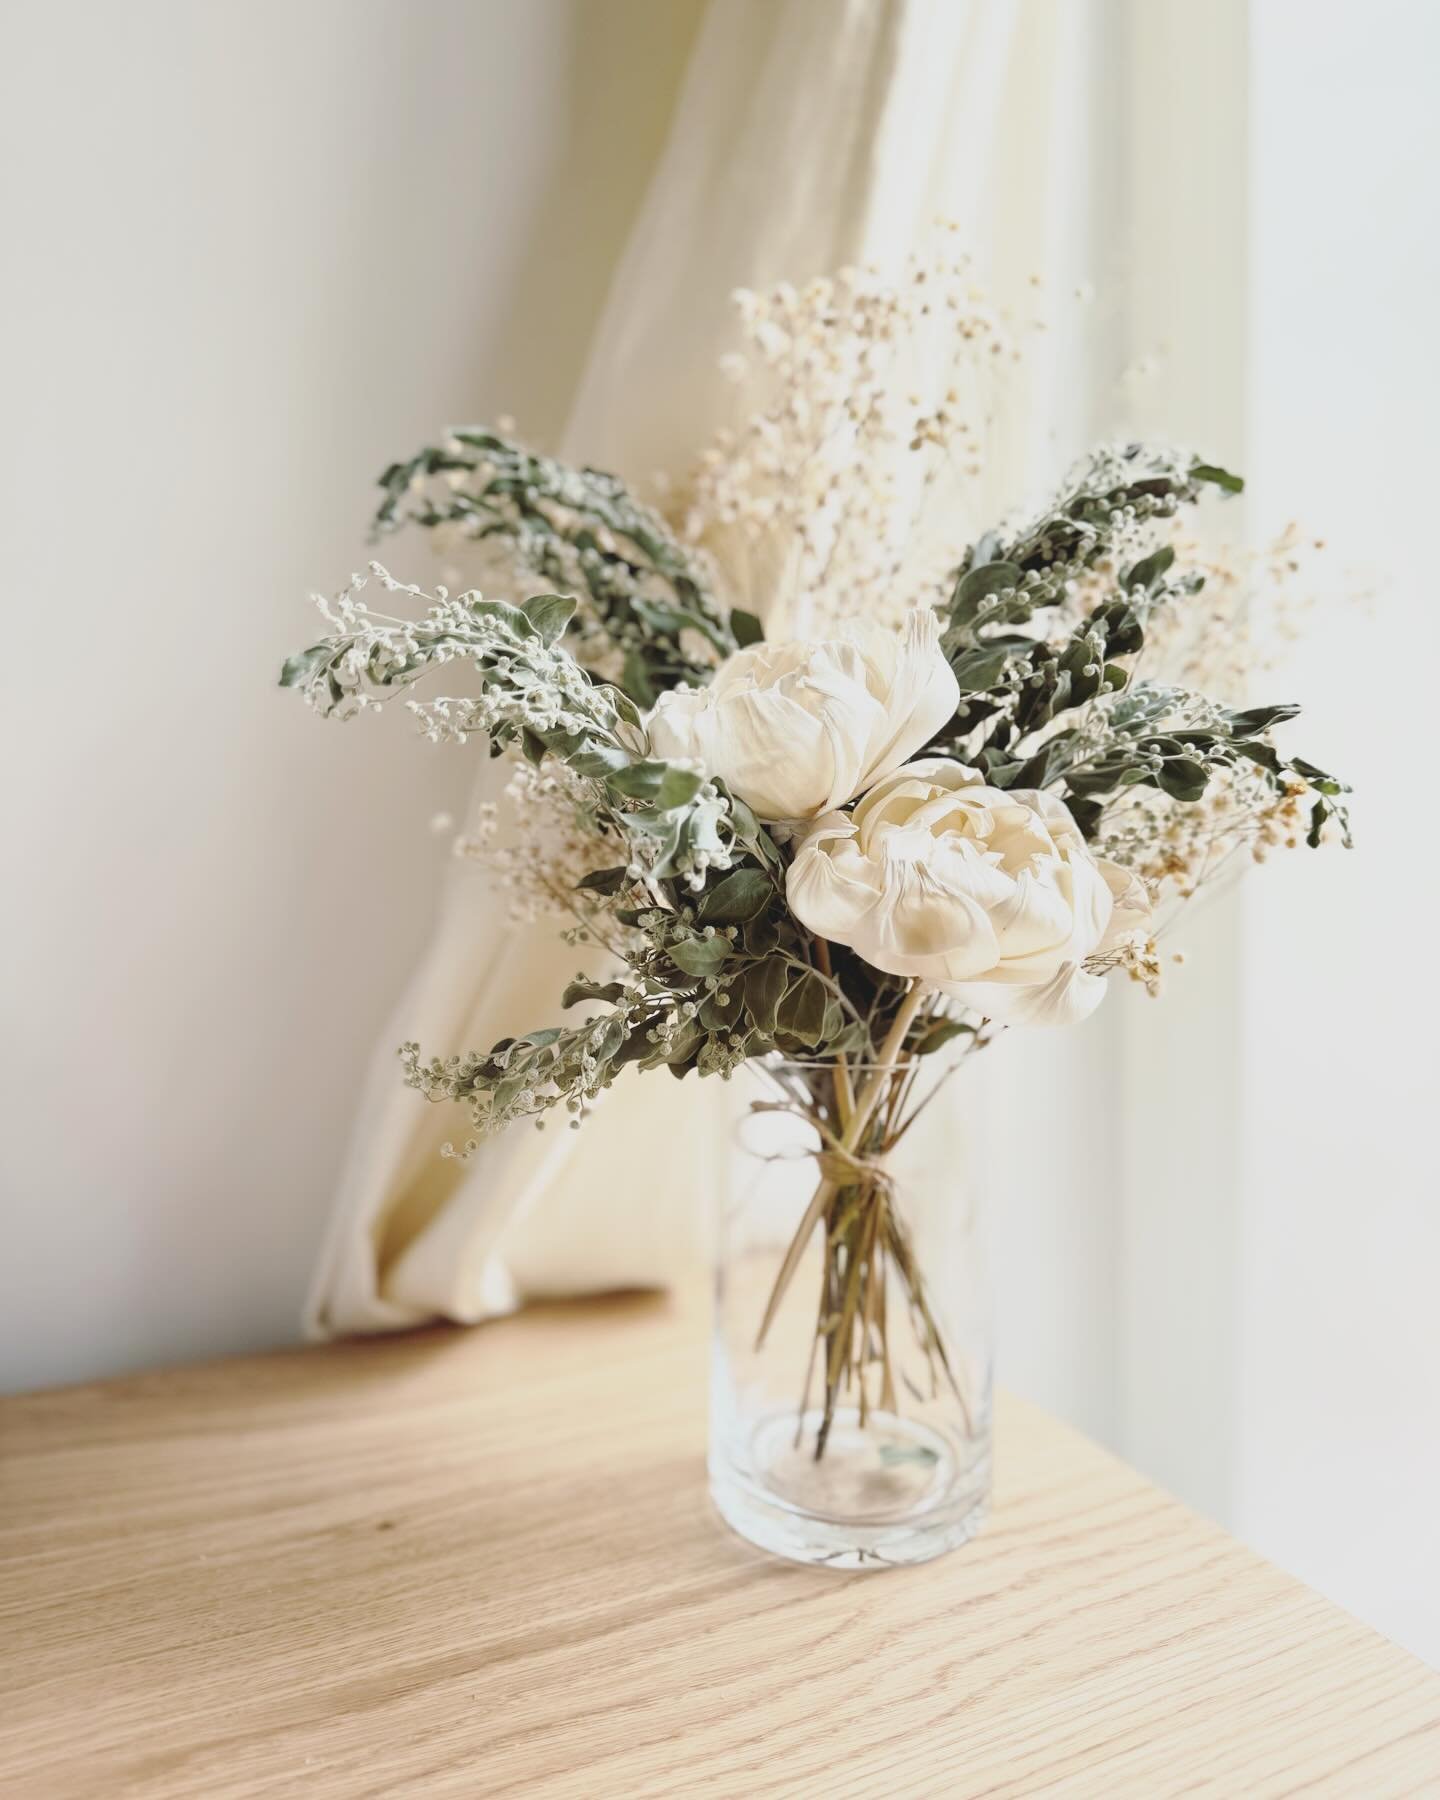 Simple dried flower arrangement&hellip; with dried baby&rsquo;s breath, mimosa leaves and white wooden flowers🤍DM me if you are interested! シンプルなアレンジ。かすみ草、ミモザの葉っぱ(ポツポツ付き)、木のお花。清楚な感じでどこにでも合いそうです。興味ある方DMください🤍#driedflowers #driedflowerbouquet #driedfl